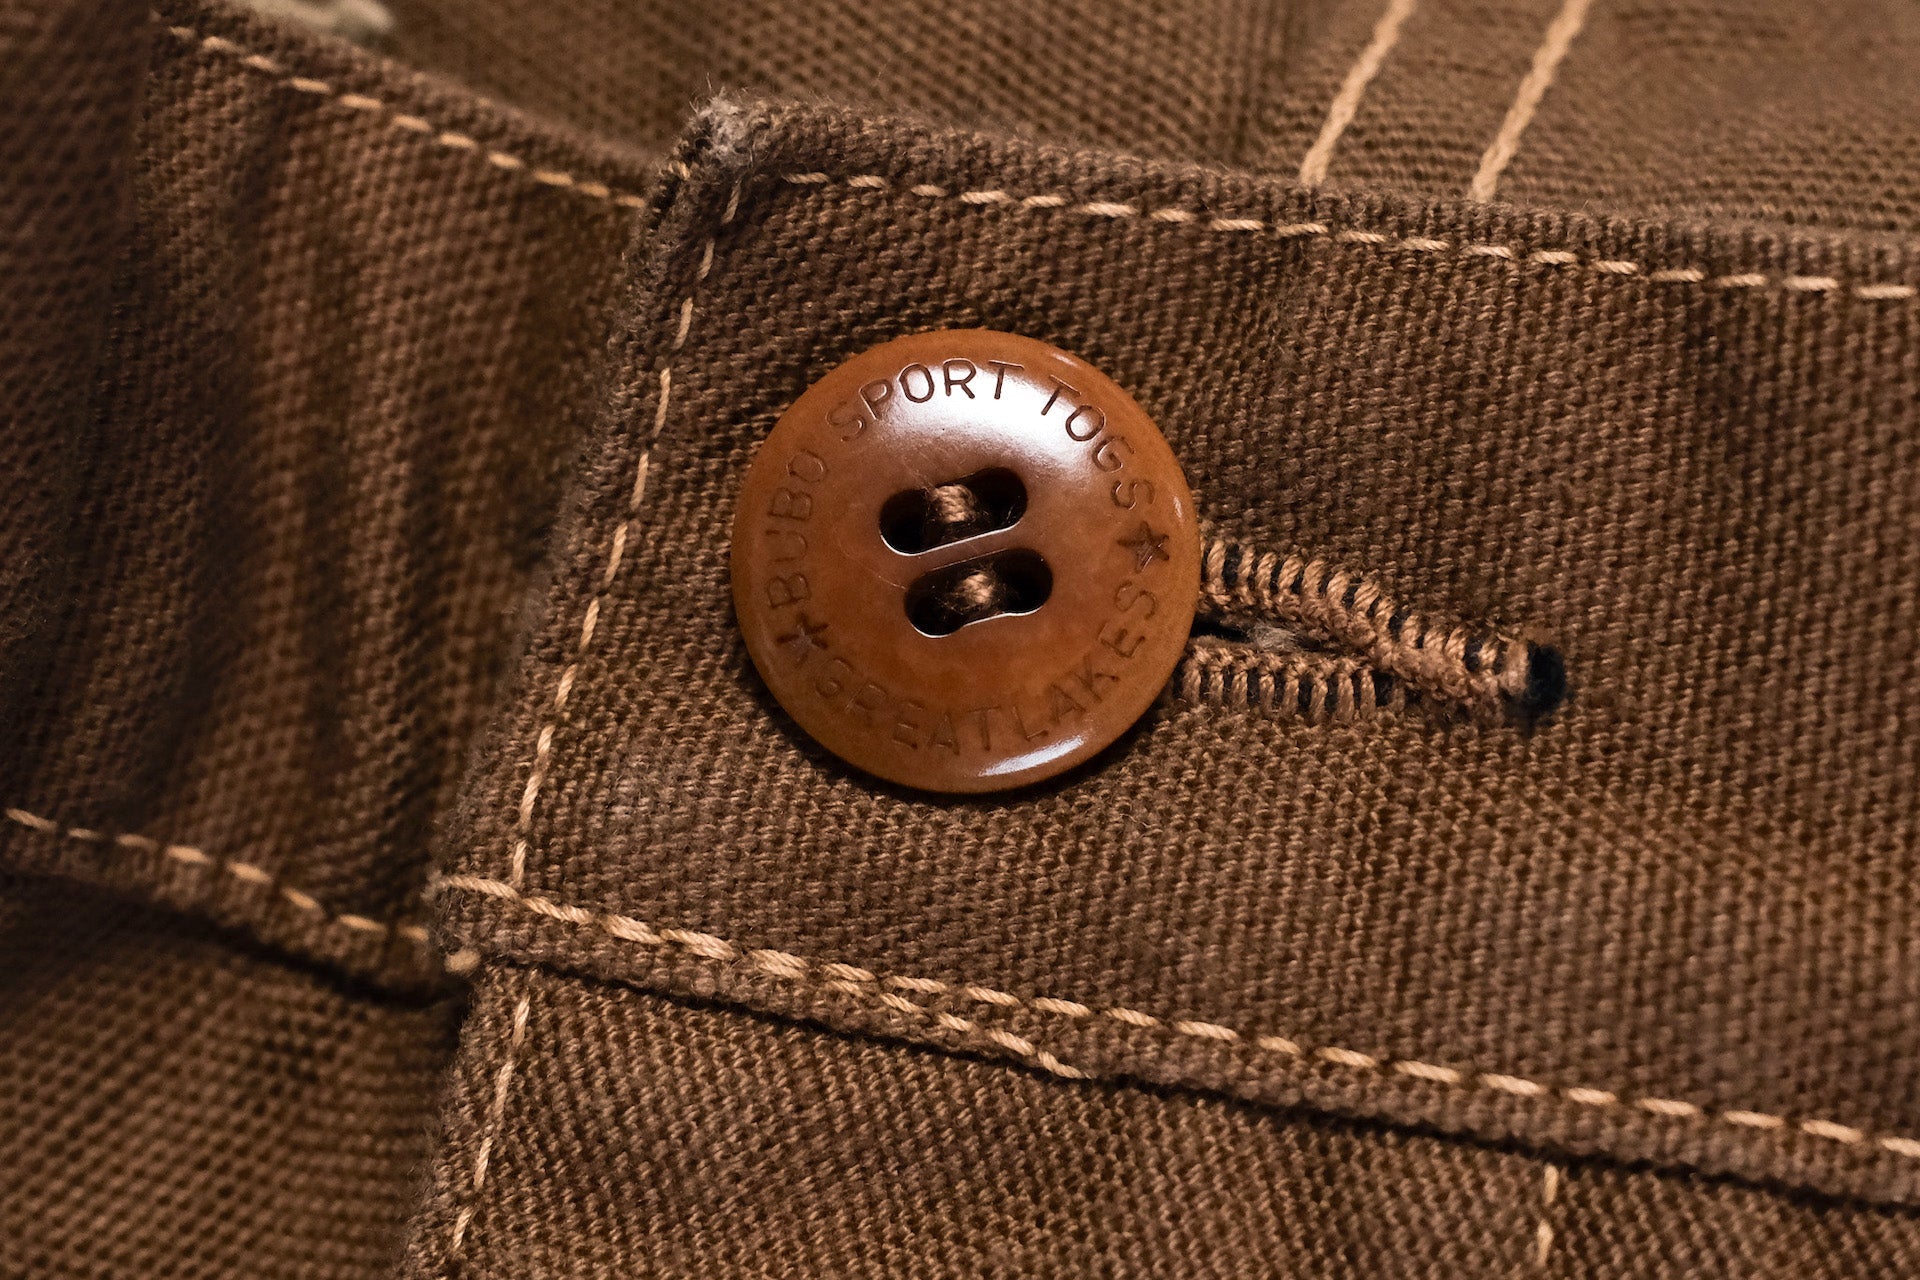 Freewheelers "Faller" Duck Canvas Trousers (Brown)